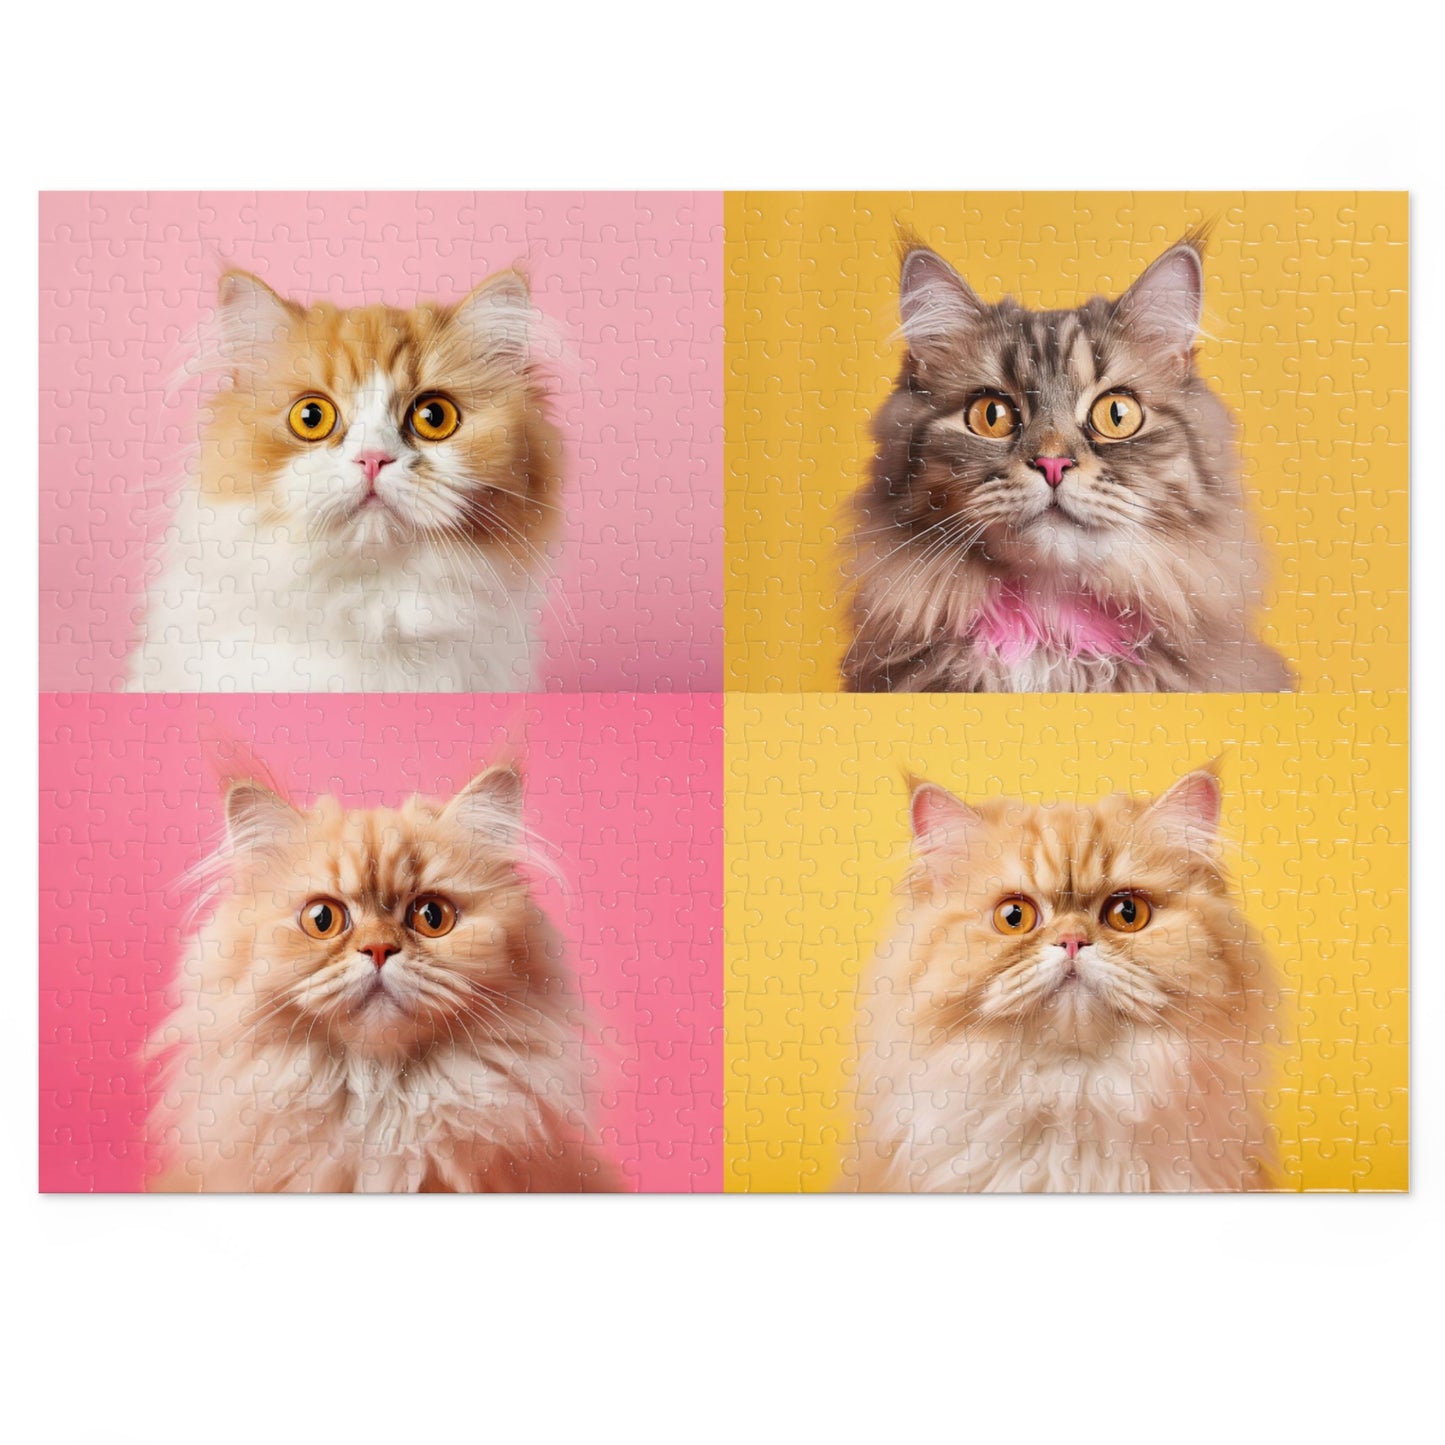 4 Adorable Cats • Jigsaw Puzzle